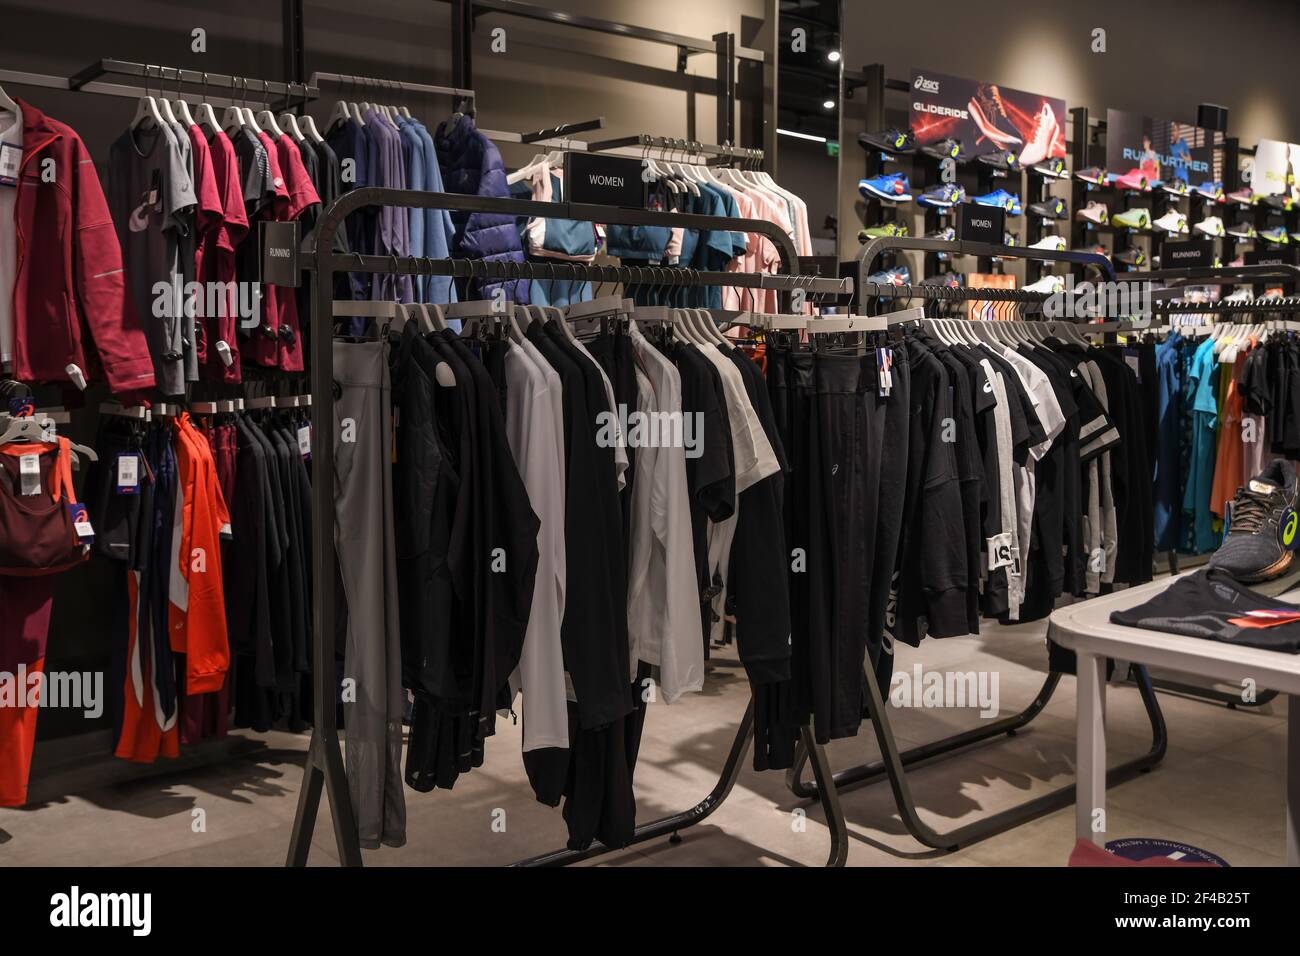 Skopje, North Macedonia - March 12, 2021: Asics store in Skopje, North  Macedonia. Asics is a Japanese multinational company which produces  footwear an Stock Photo - Alamy